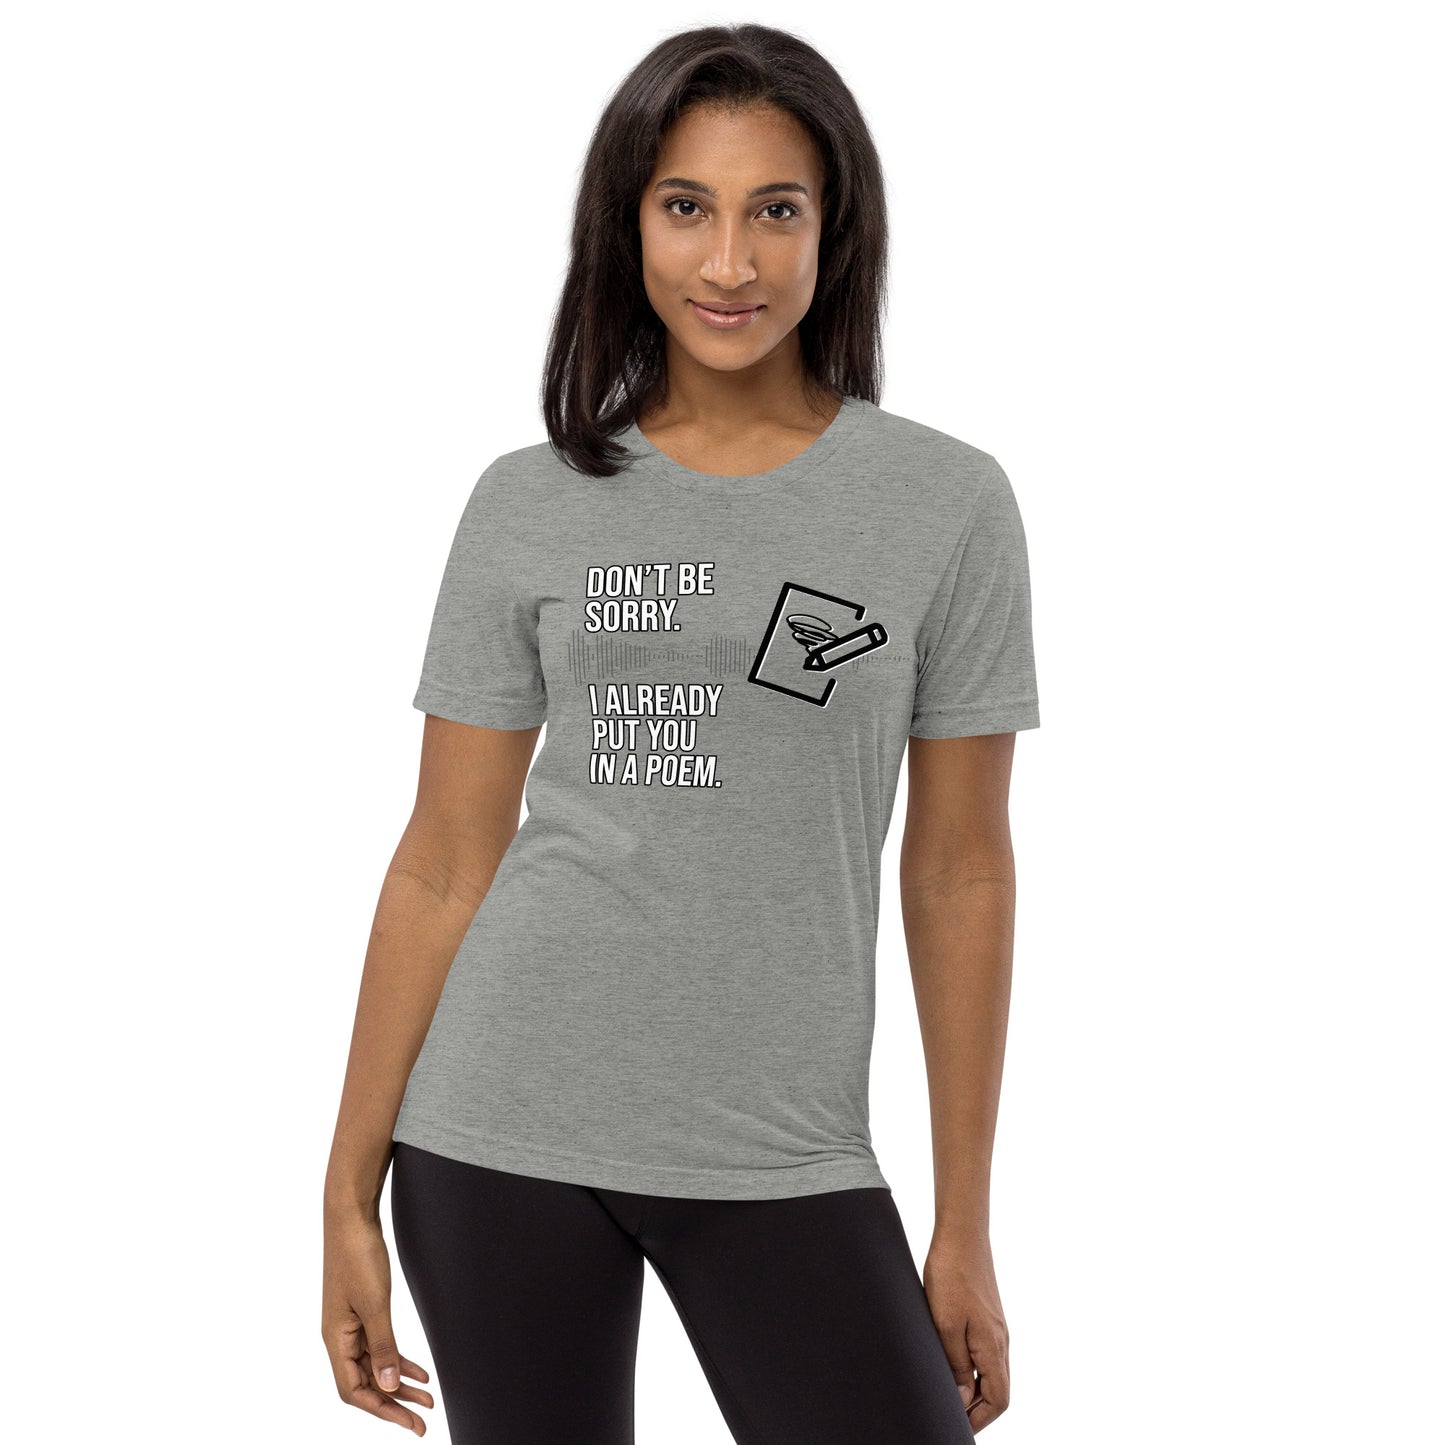 I Bet You Think This Poem Is About You - White font Short Sleeve Tri-Blend Shirt